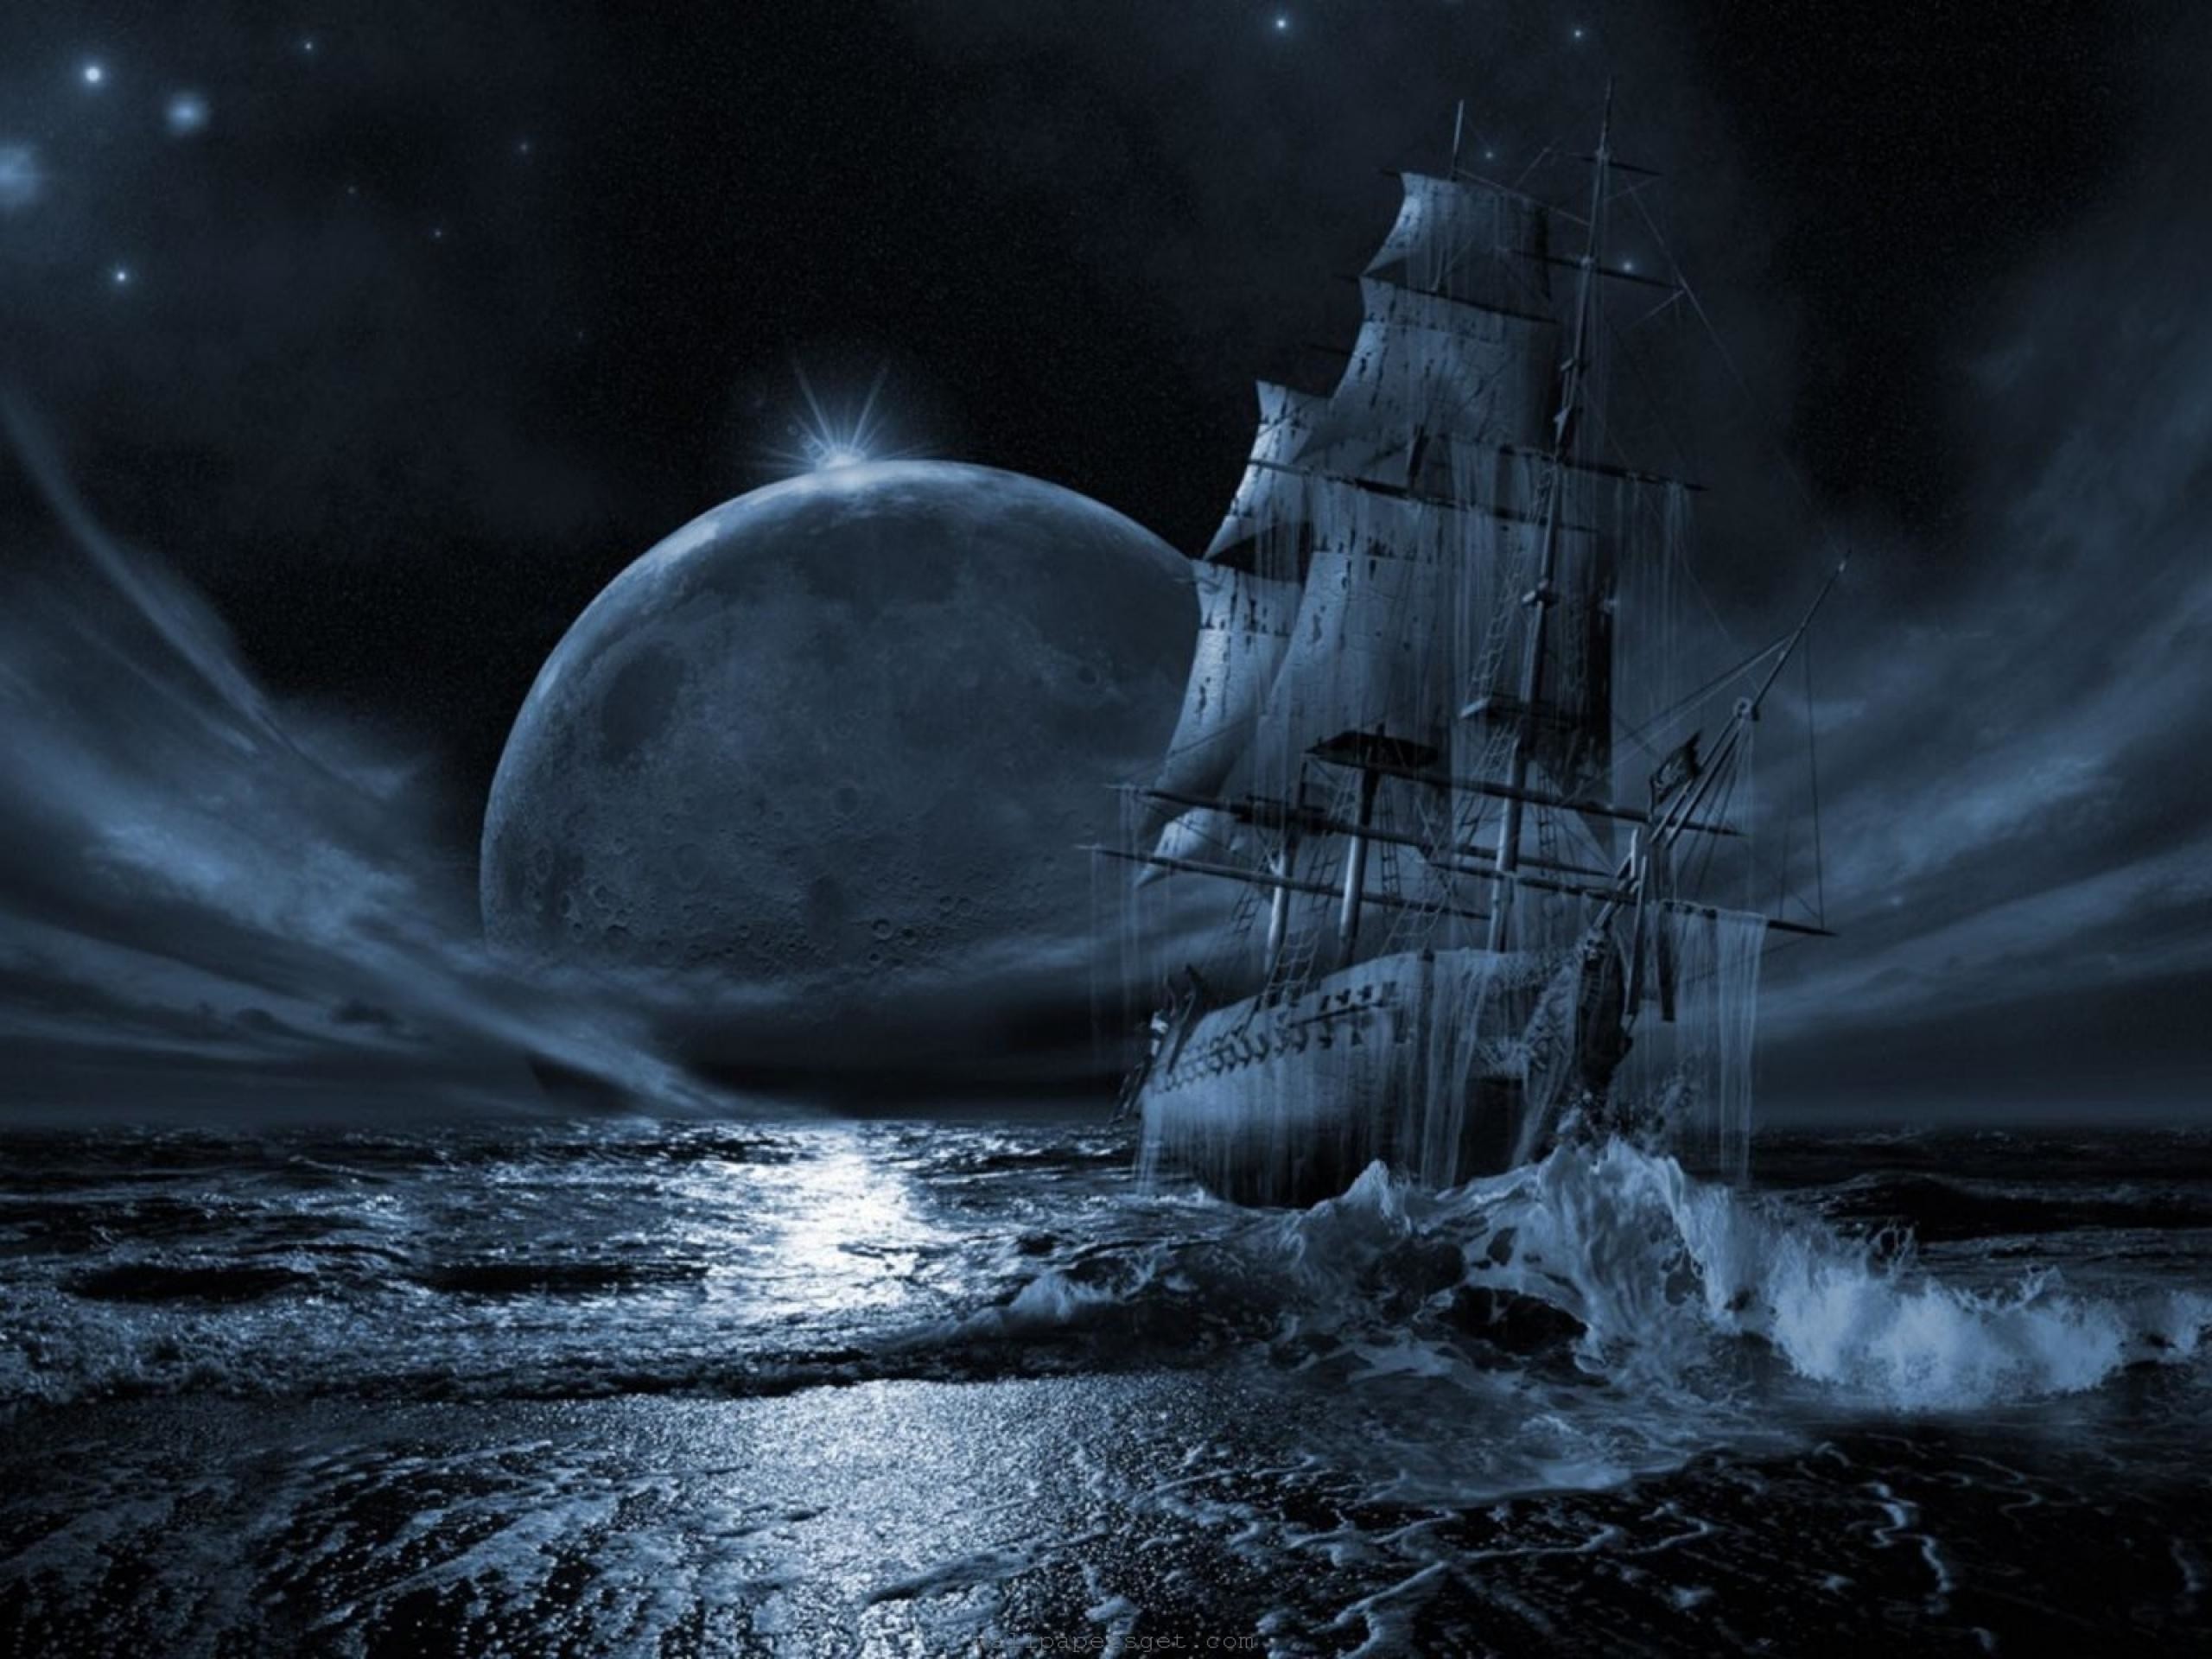 2560x1920 Ghost Ship Wallpapers Wallpaper | HD Wallpapers | Pinterest | Pirate ships  and Wallpaper